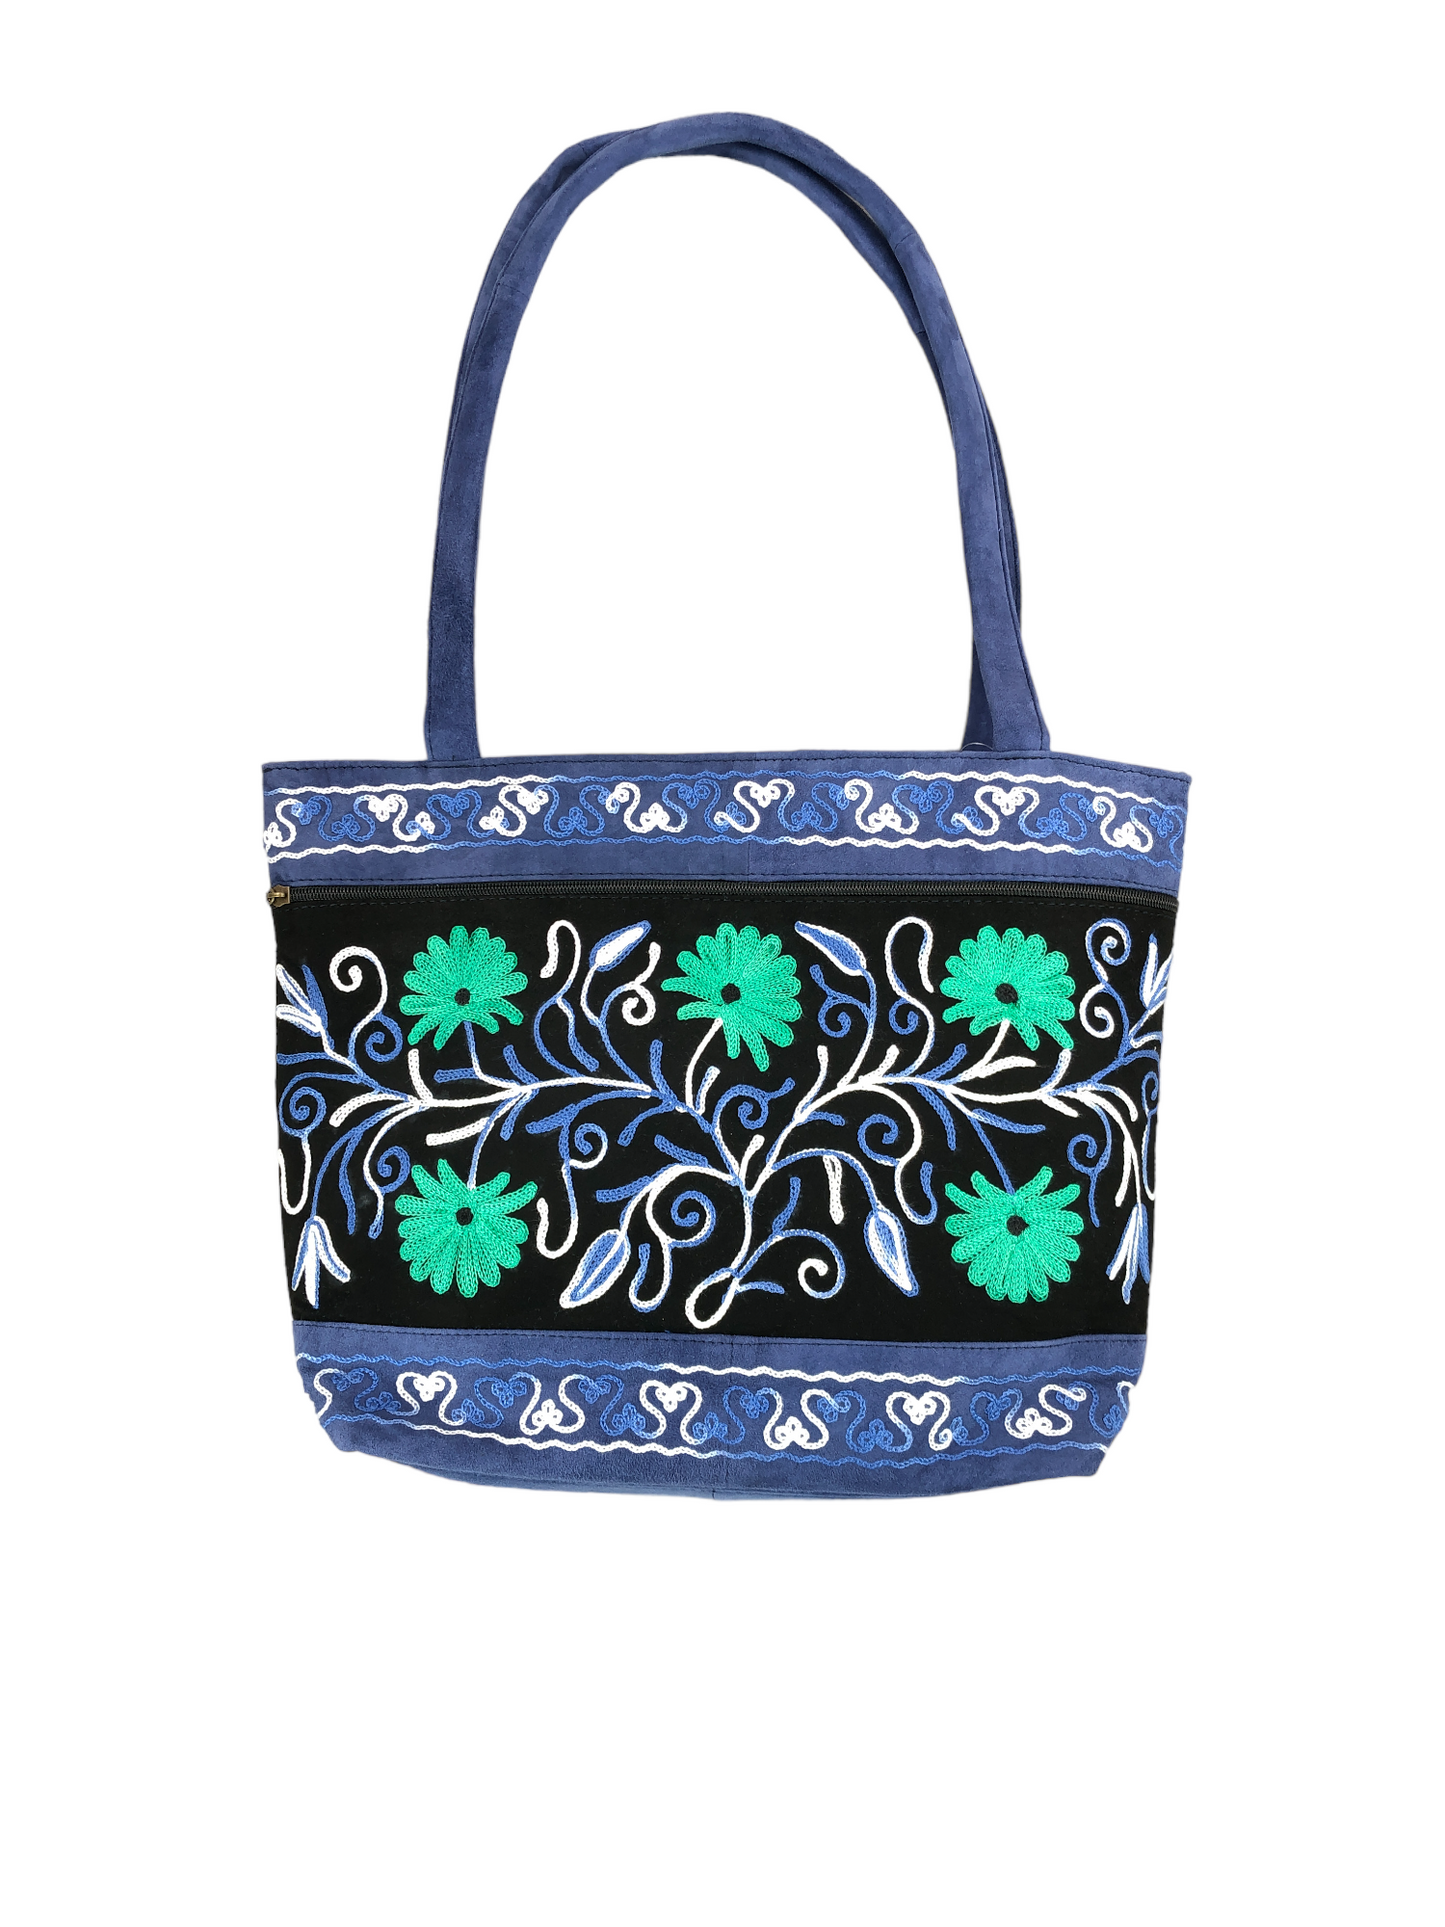 Handmade Black And Blue Suede Embroidered Tote Bag